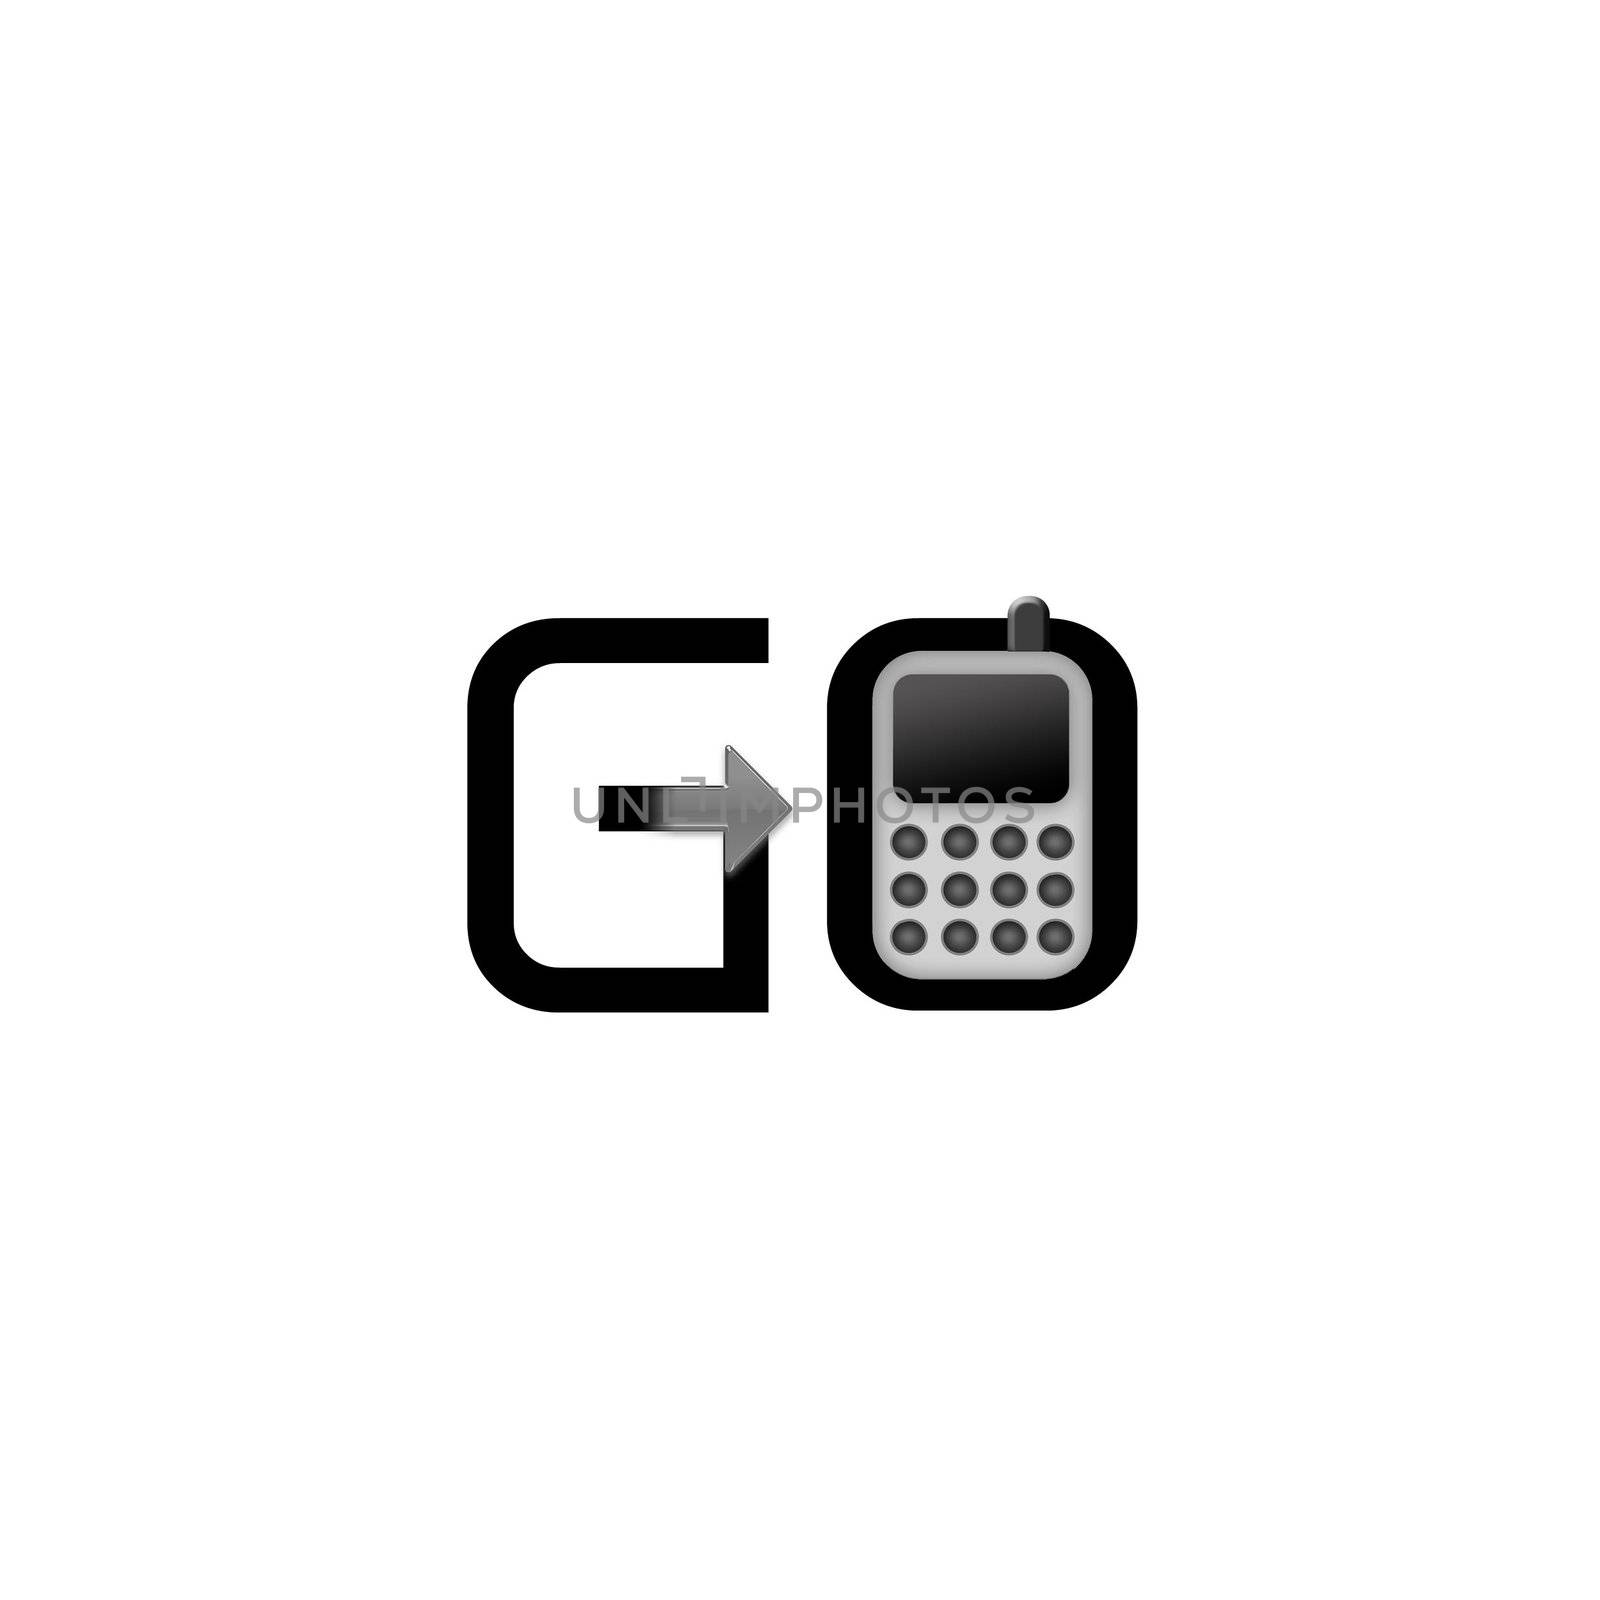 Letters G and O with a grey mobile phone- business logo by shawlinmohd